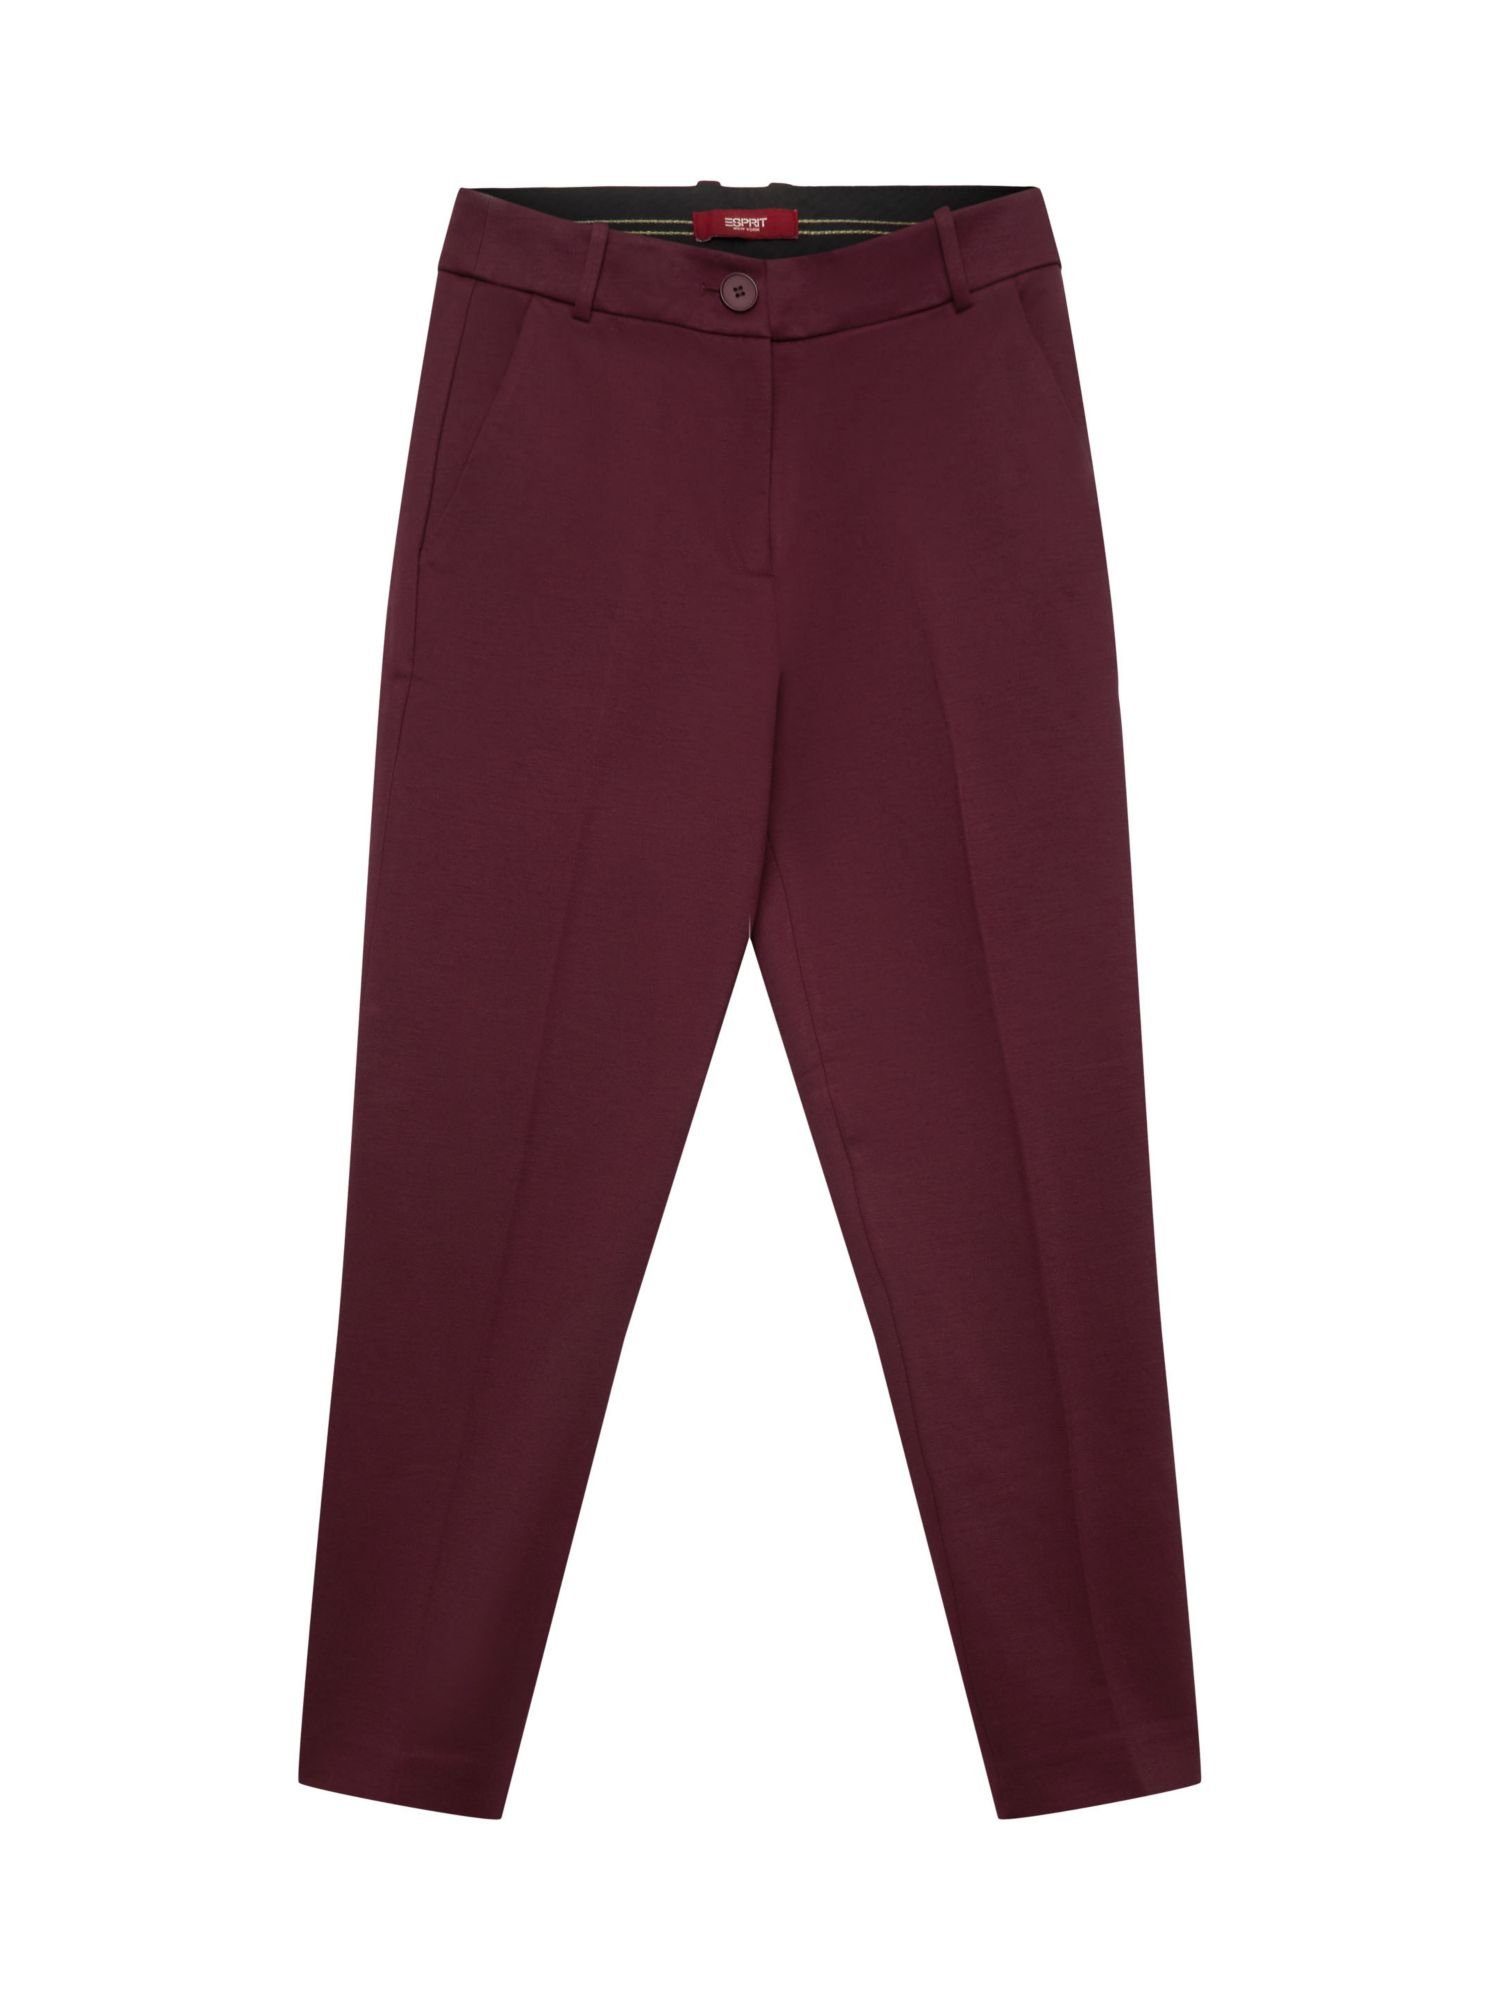 PUNTO Stretch-Hose AUBERGINE Tapered Collection Match Esprit Mix SPORTY & Pants